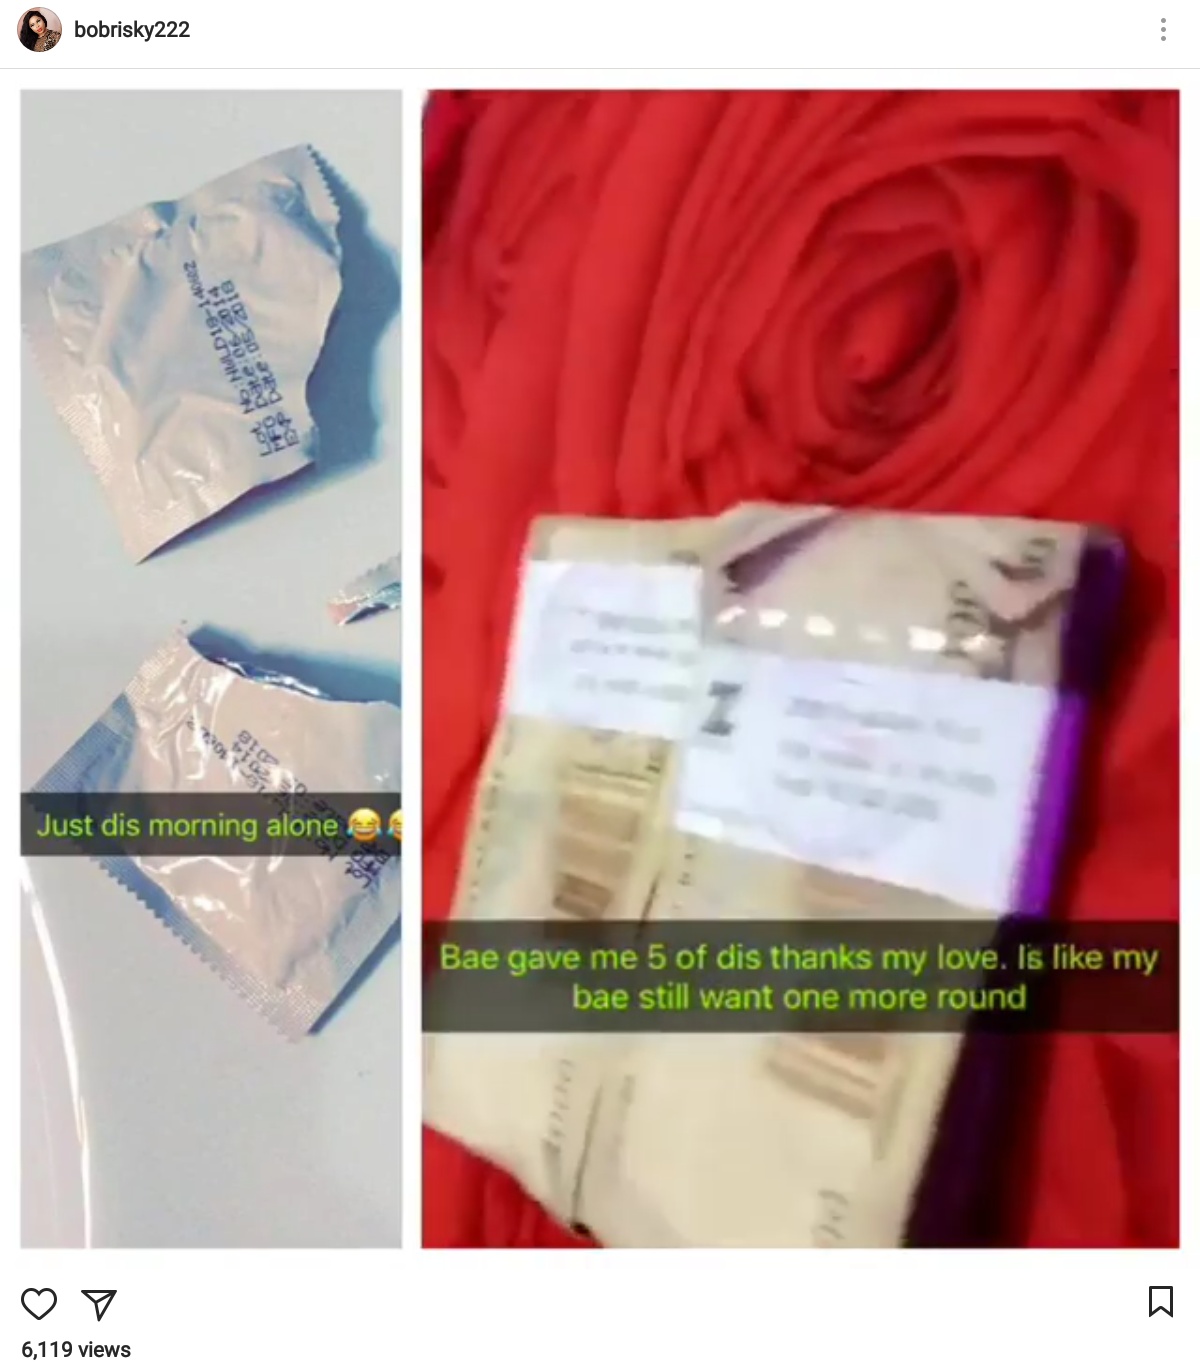 Bobrisky Shares Photos Of Two Torn Open Condom Packets With Wads Of Cash (1)